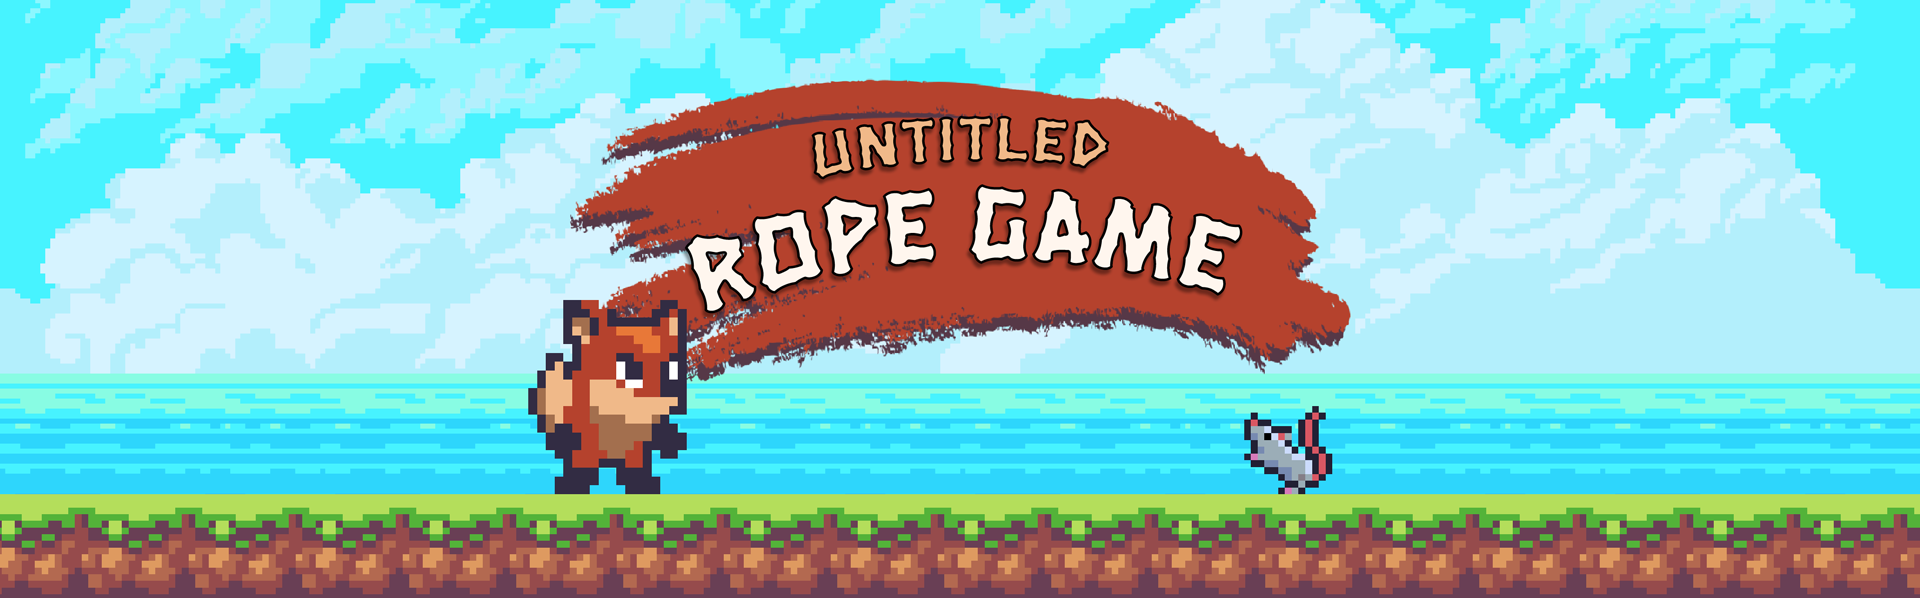 Untitled Rope Game